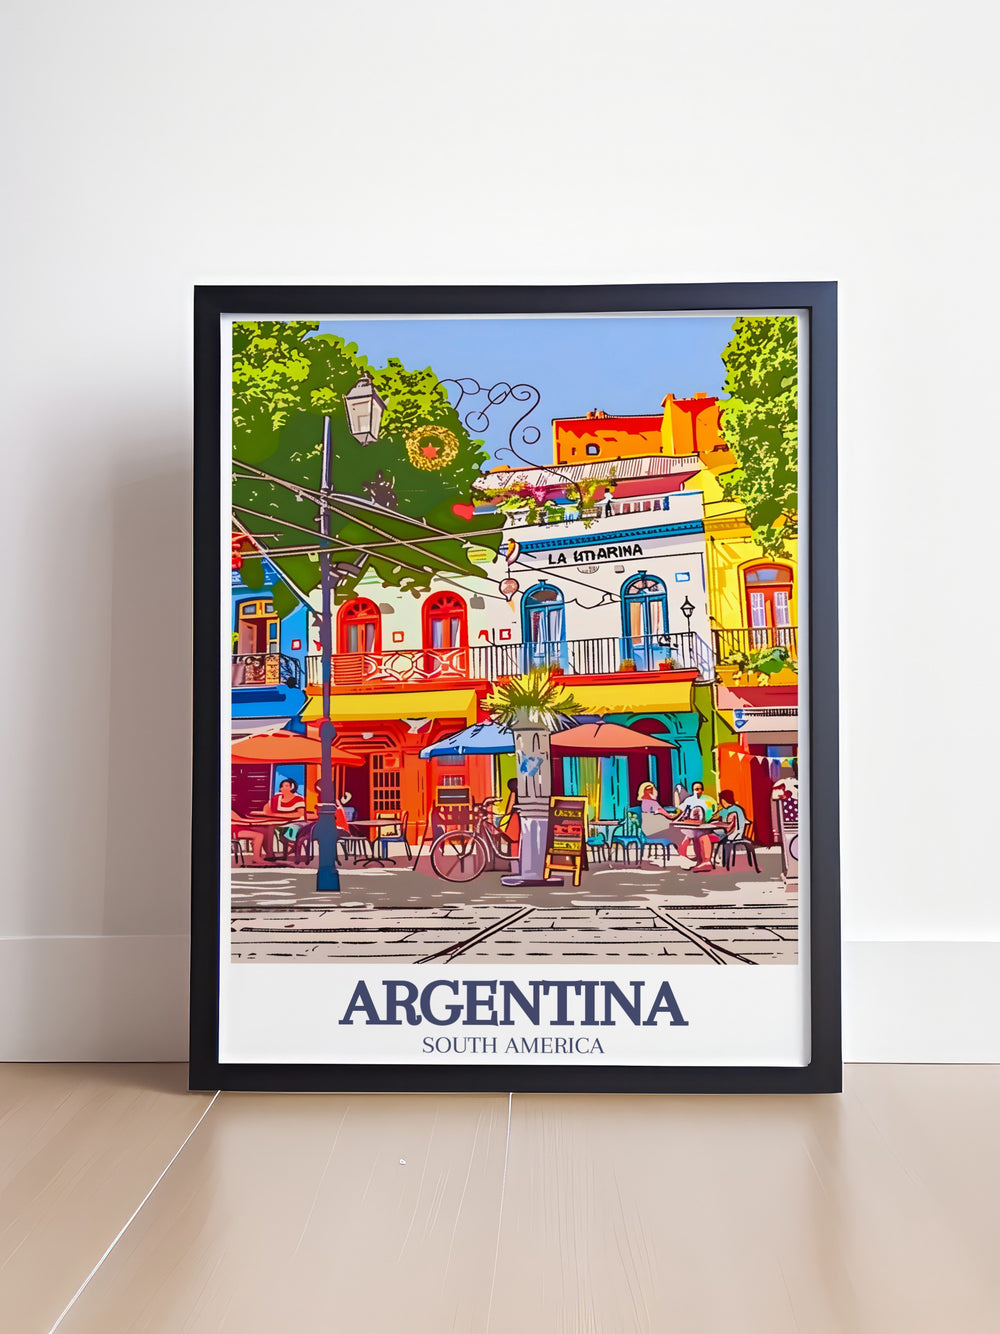 Stunning Buenos Aires, La Boca artwork showcasing the iconic architecture and cultural vibrancy of the area. This Argentina art piece is ideal for any space that needs a burst of color and energy. A great gift for anyone who loves travel and art.